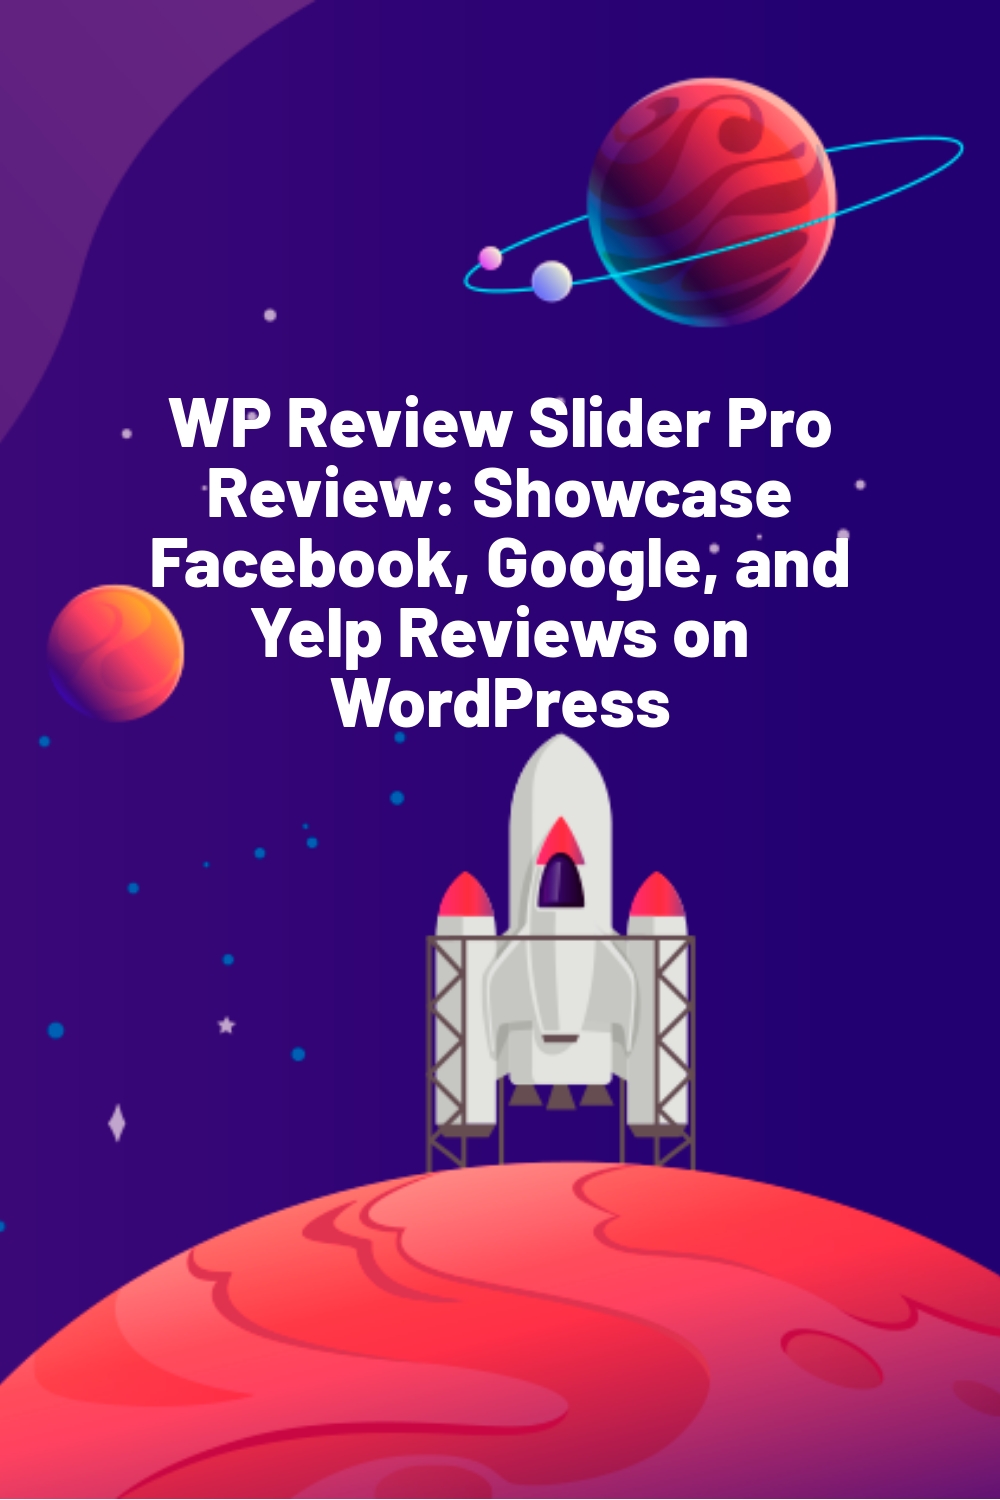 WP Review Slider Pro Review: Showcase Facebook, Google, and Yelp Reviews on WordPress